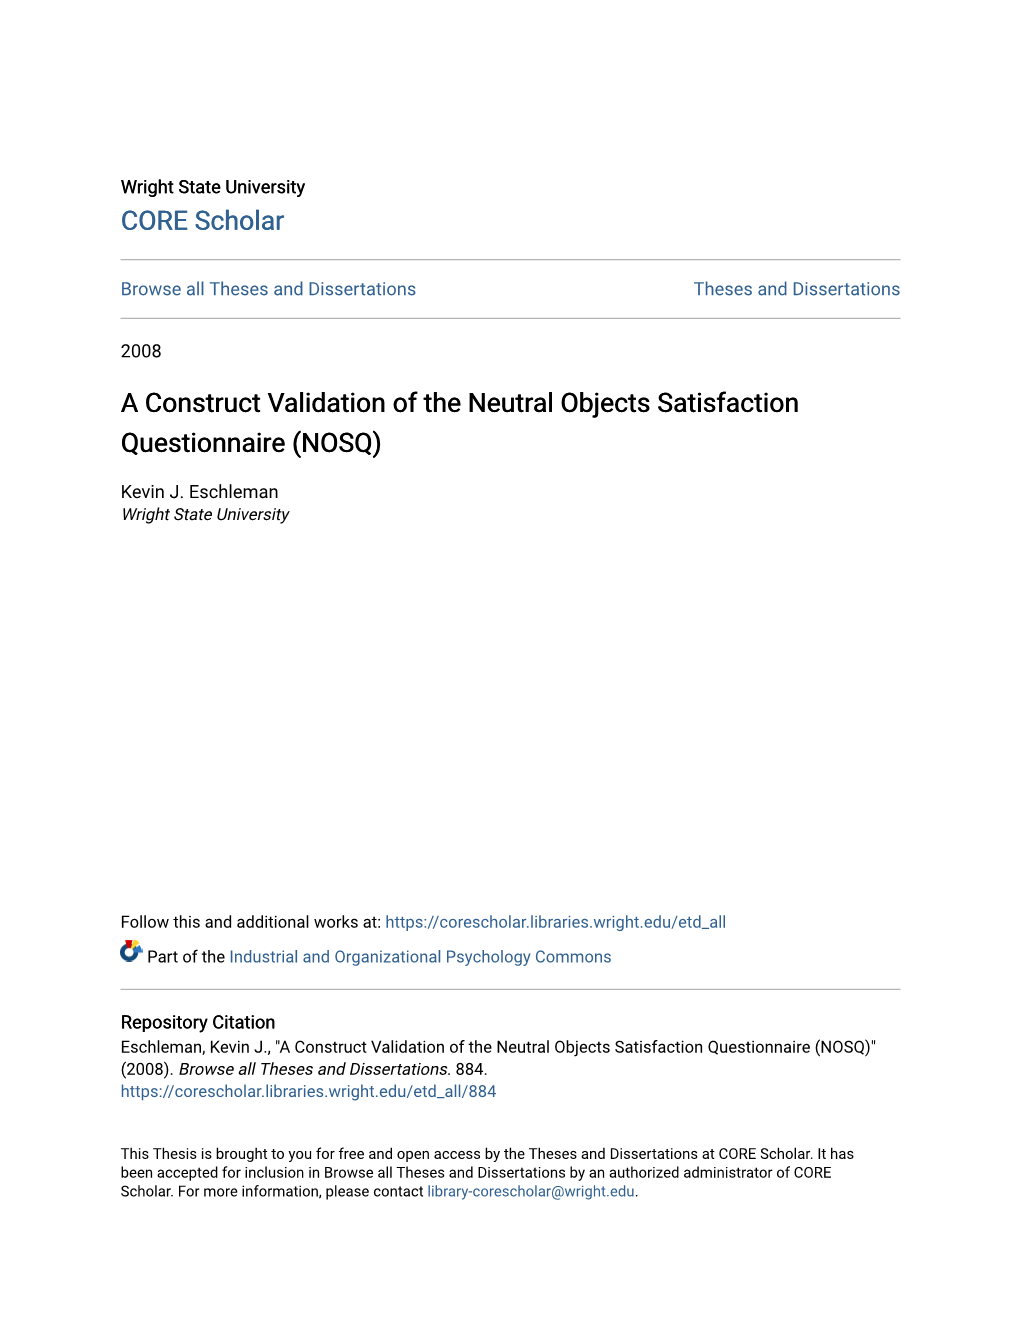 A Construct Validation of the Neutral Objects Satisfaction Questionnaire (NOSQ)